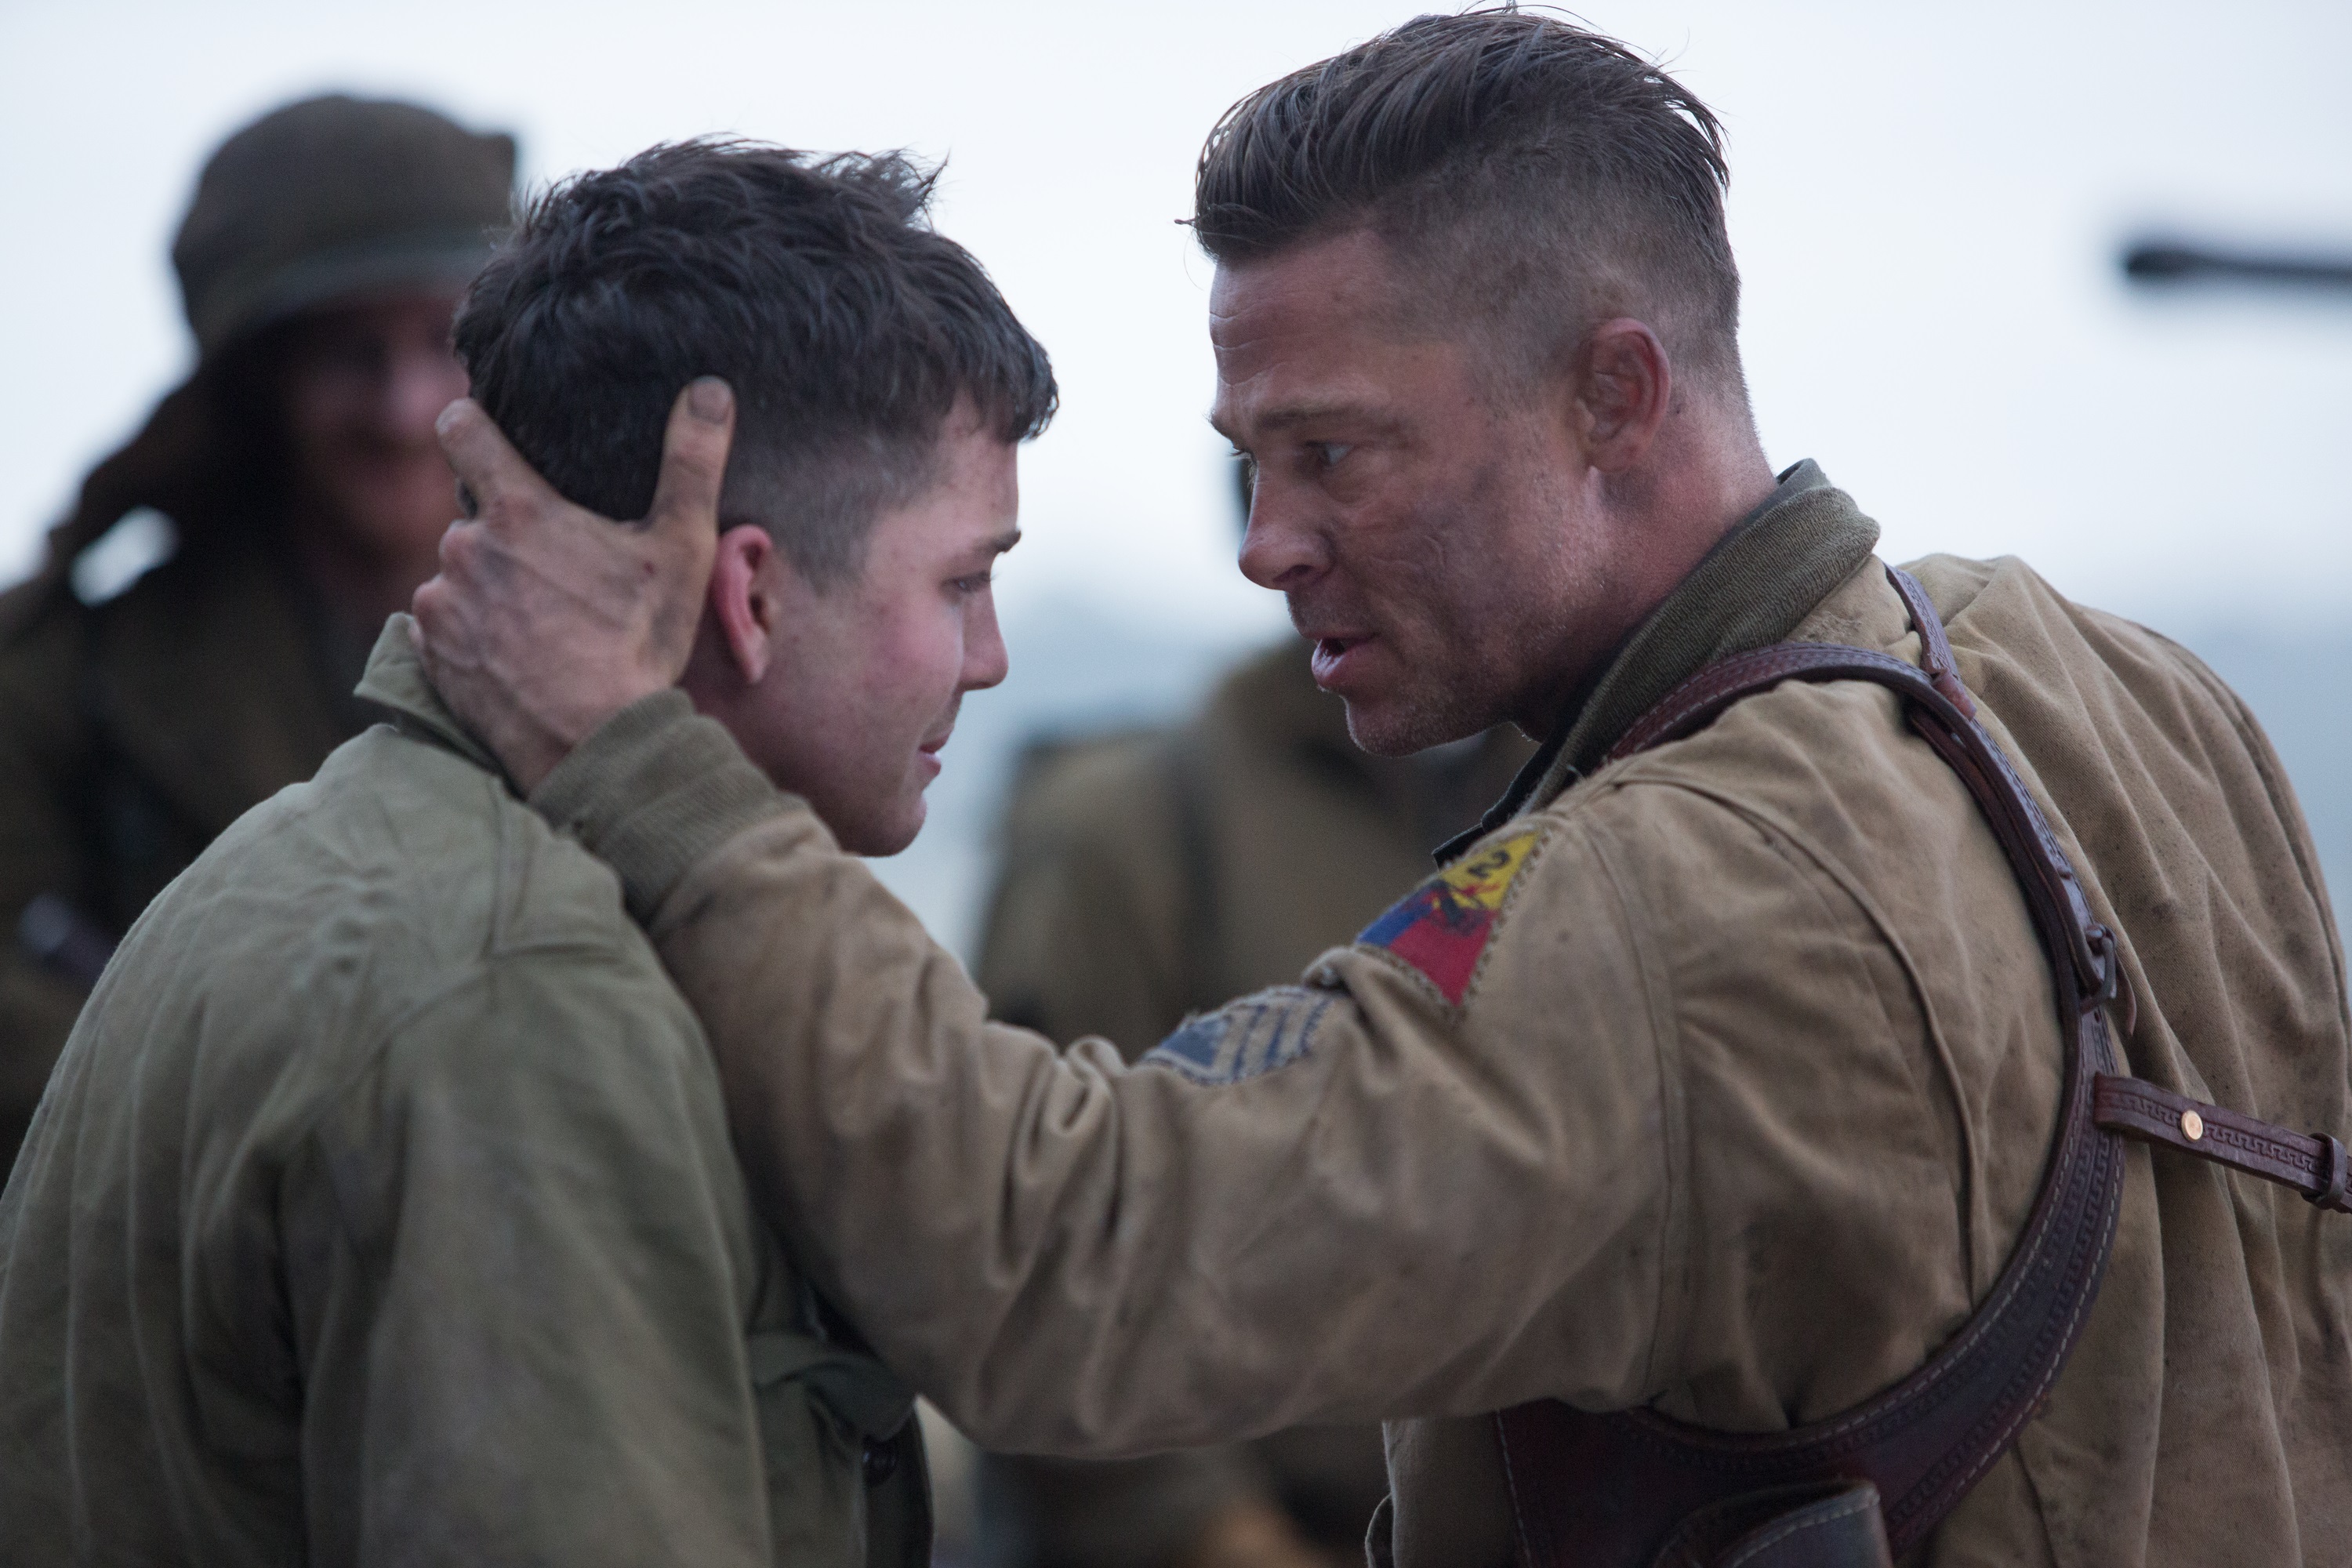 fury-review-well-made-but-not-much-substance-brad-pitt-spouts-something-cliche-for-the-1000x.jpeg